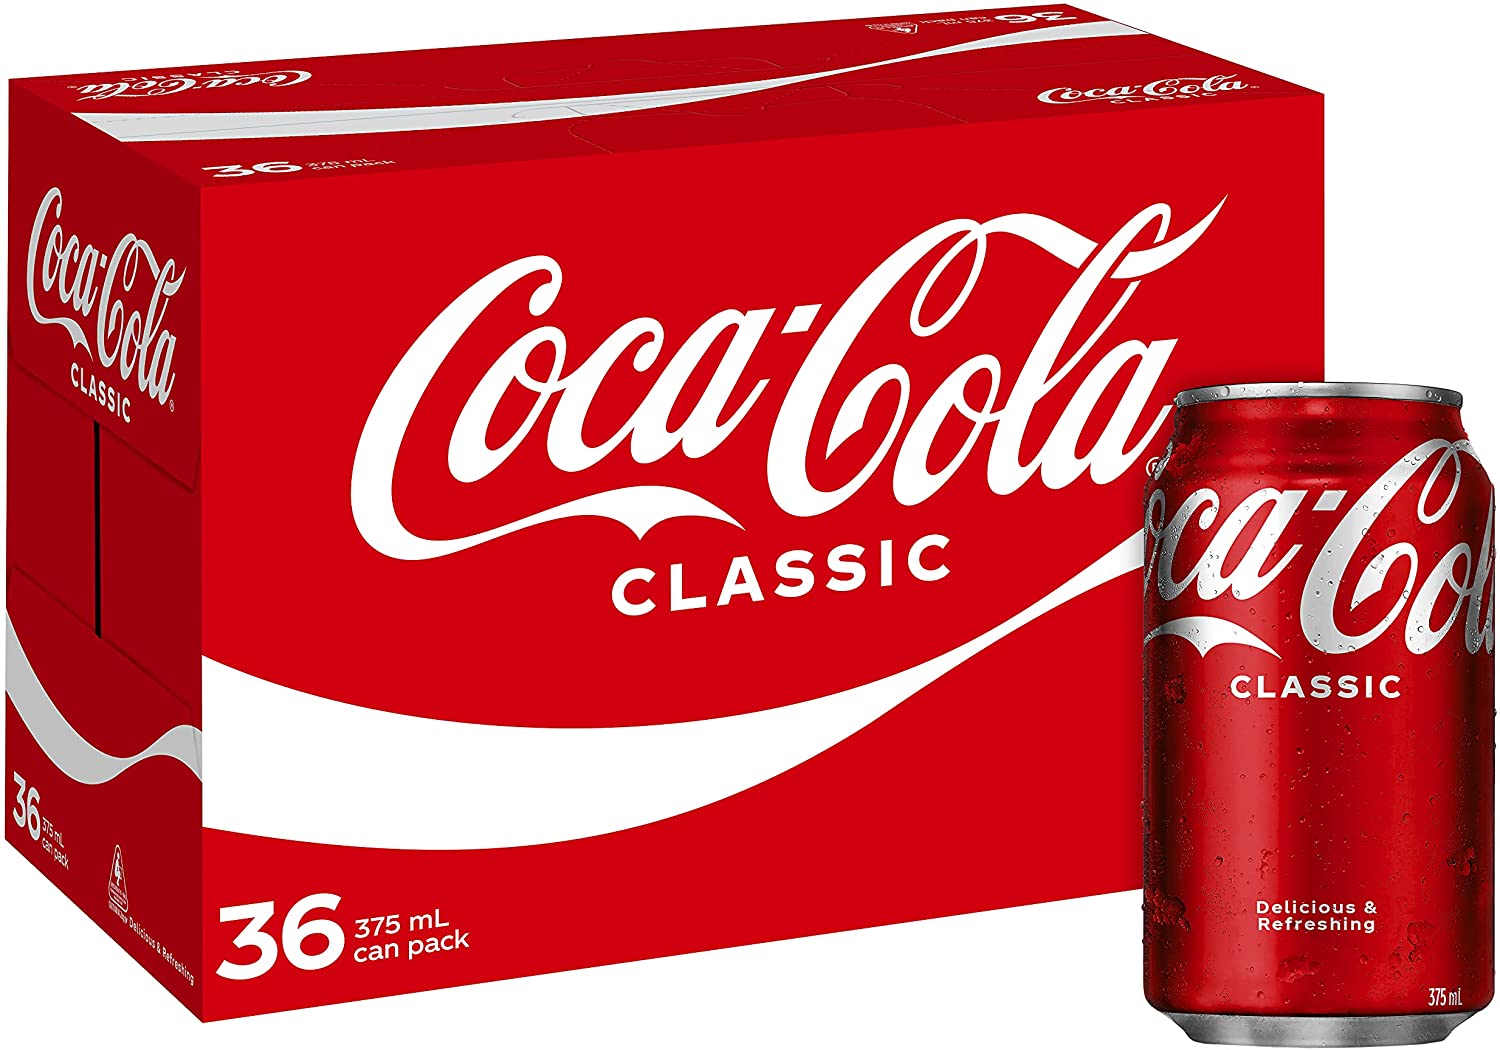 Buy Coca-Cola Classic Soft Drink Multipack Cans 36 x 375mL now $24.75